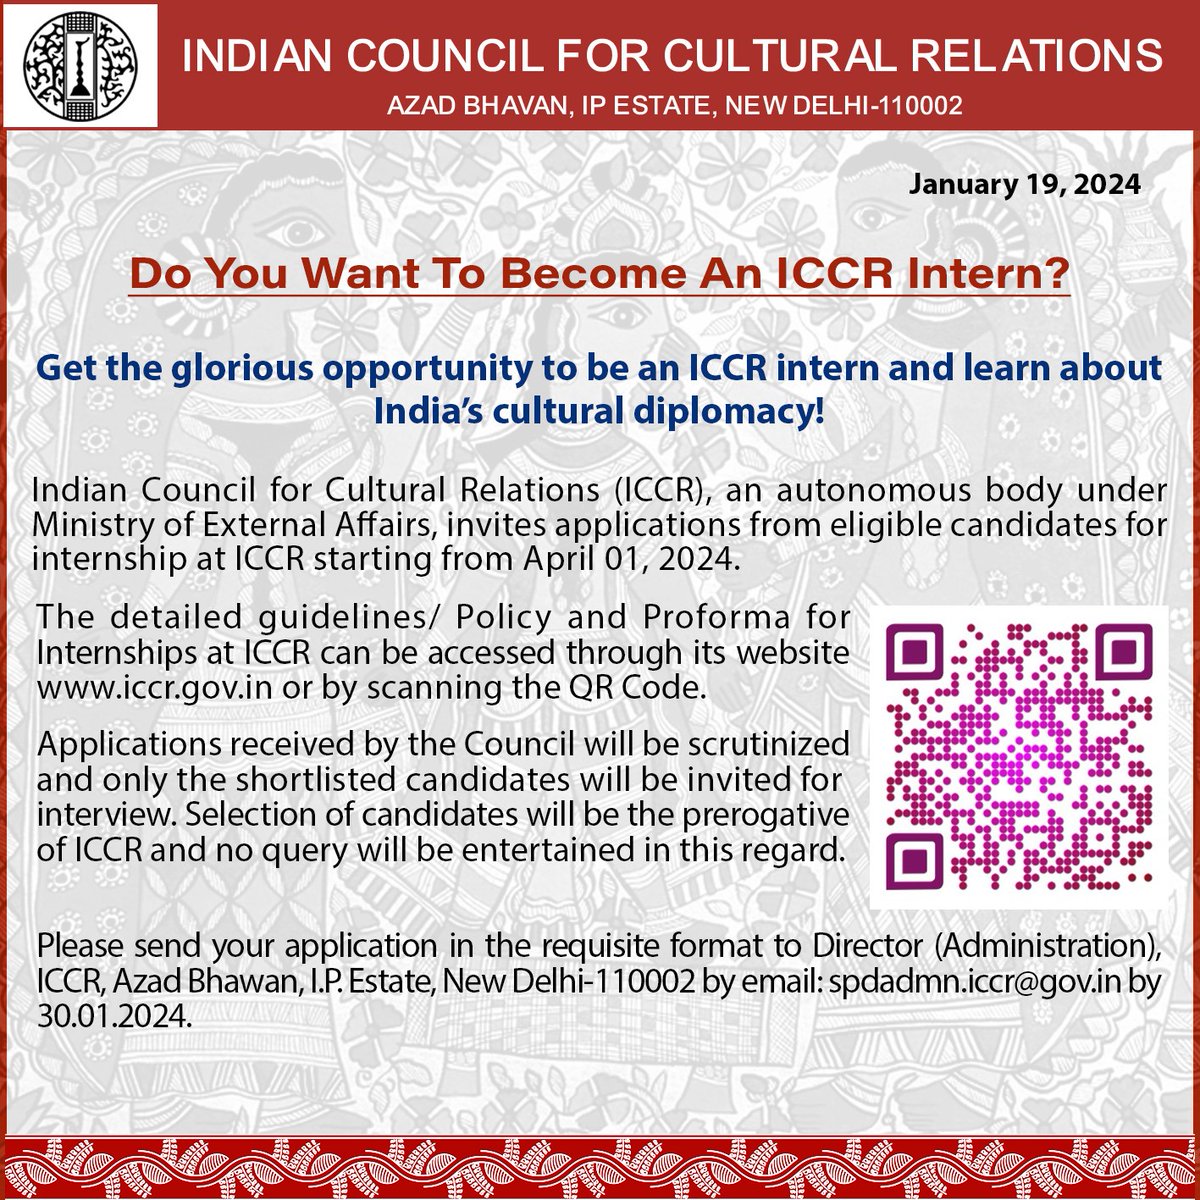 Your #opportunity to intern at ICCR awaits!   

Eligible candidates are invited to apply for an #internship starting April 1, 2024.   

For detailed guidelines, scan the QR code or visit iccr.gov.in.

 #WorkwithUs